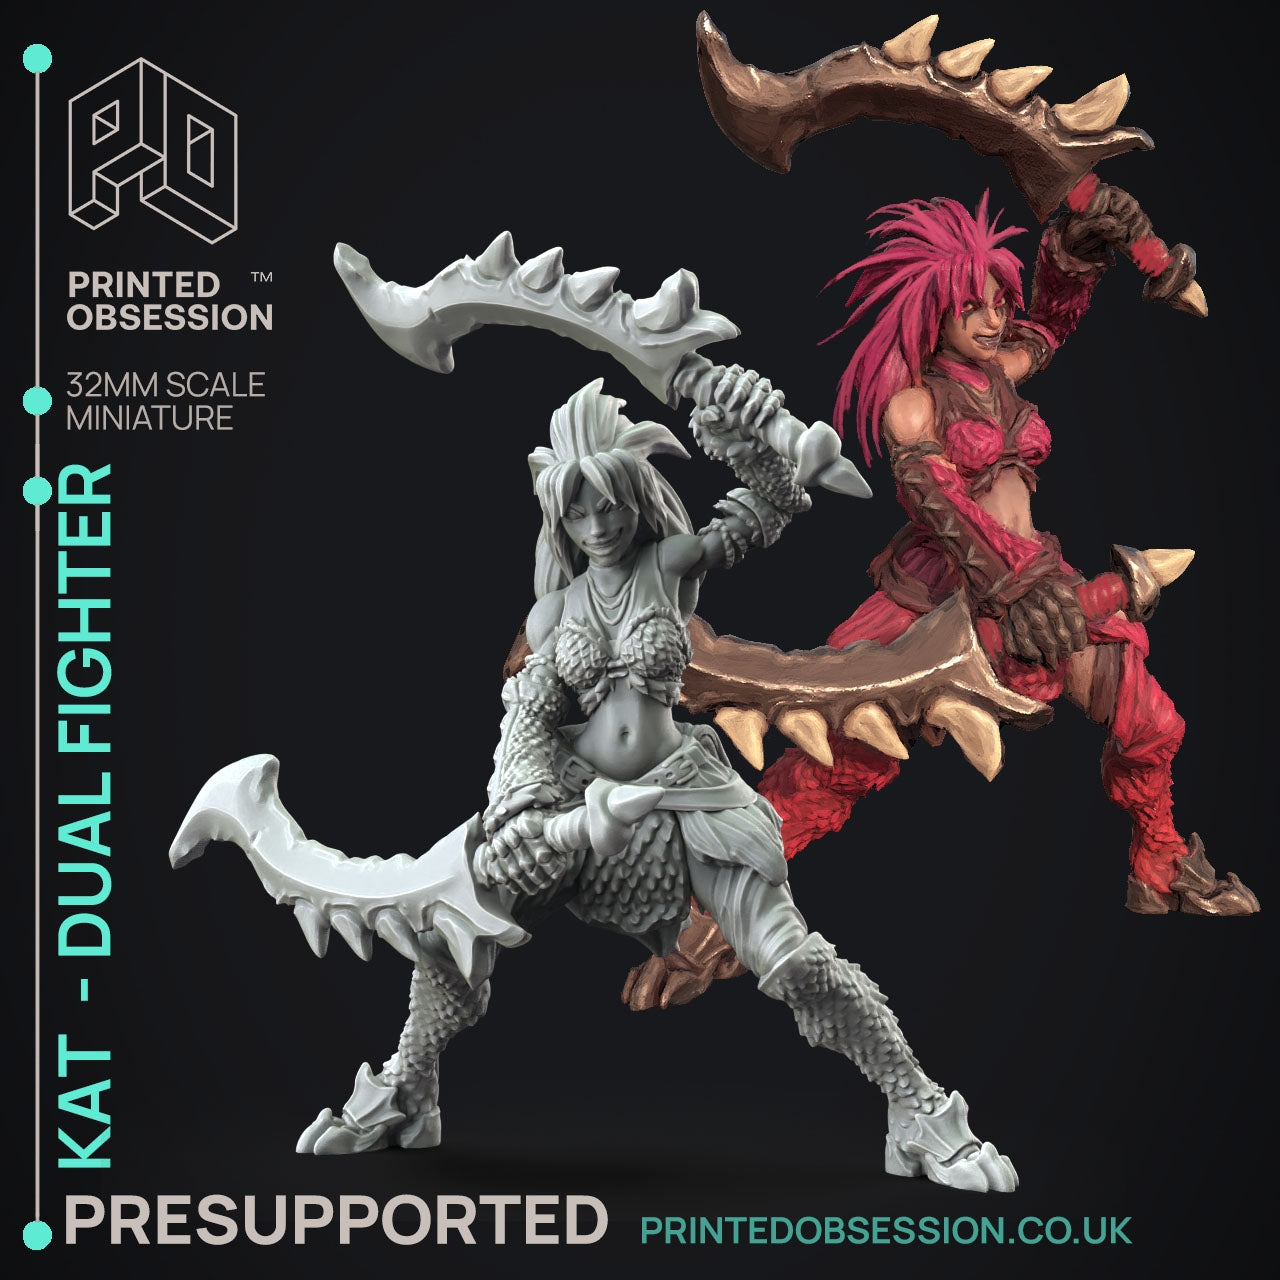 Kat Dual Fighter - The Printed Obsession - Table-top mini, 3D Printed Collectable for painting and playing!